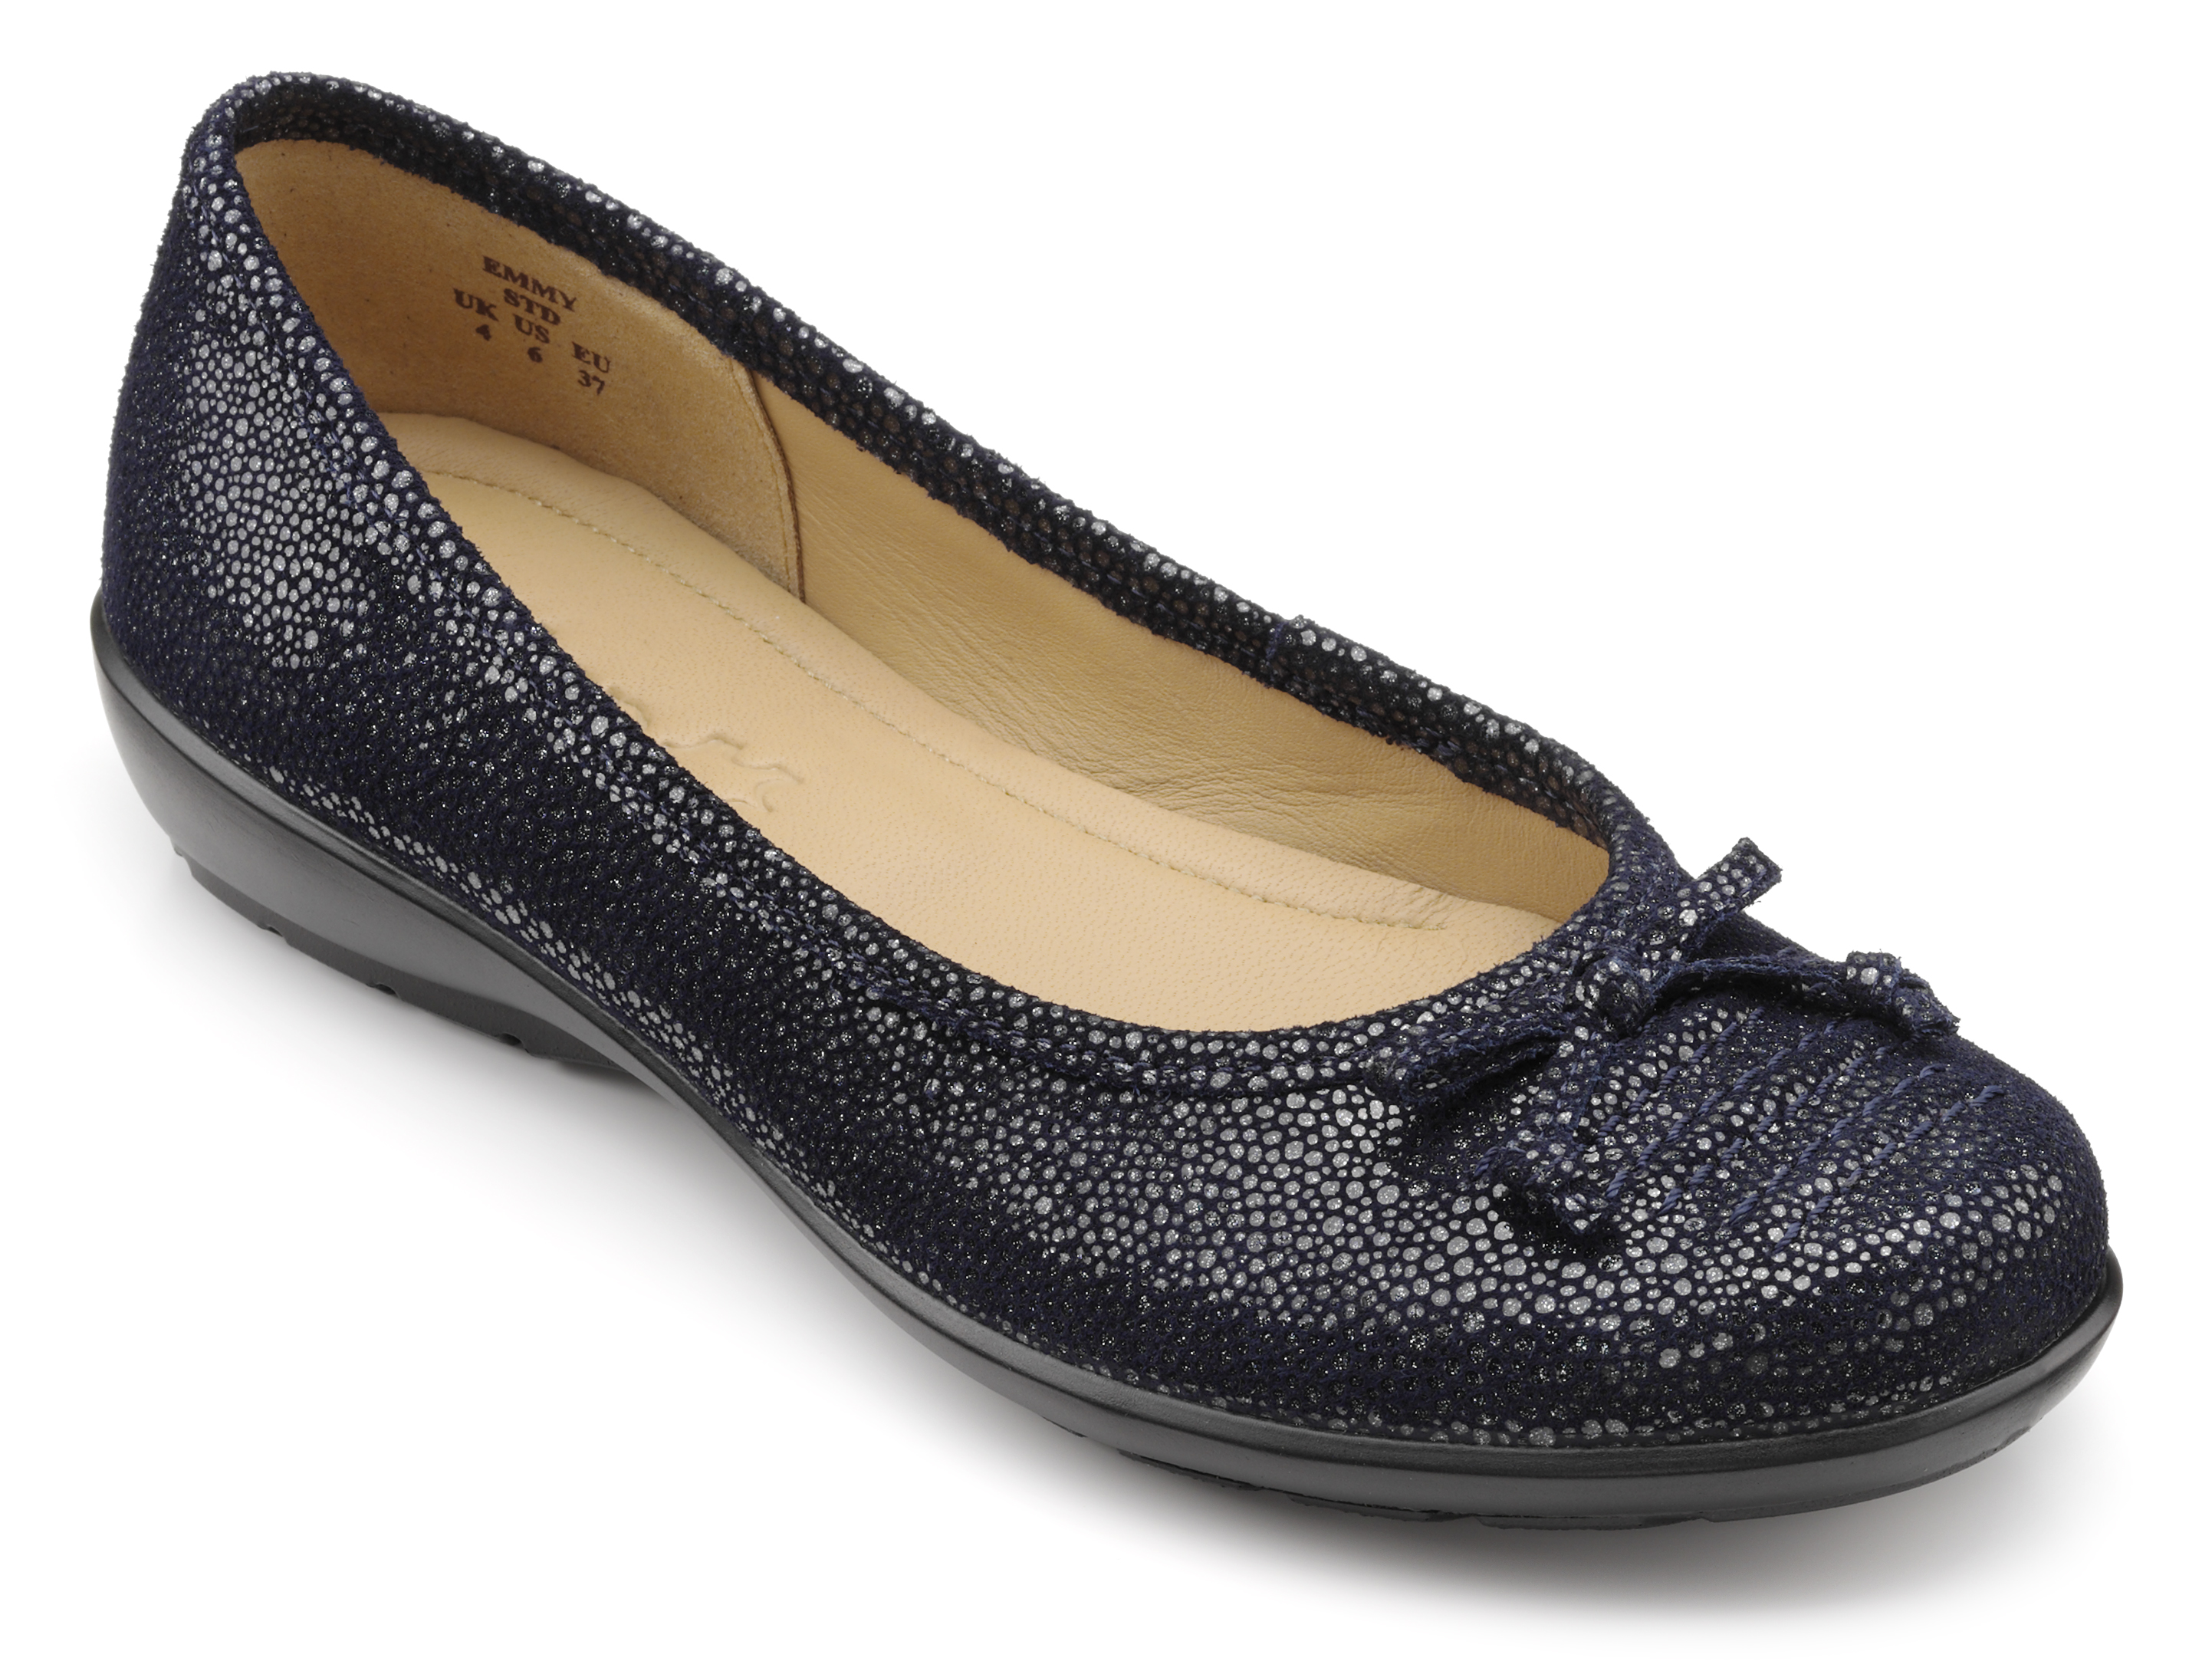 HOTTER NAVY EMMY PUMP | Rosella - Style inspired by elegance